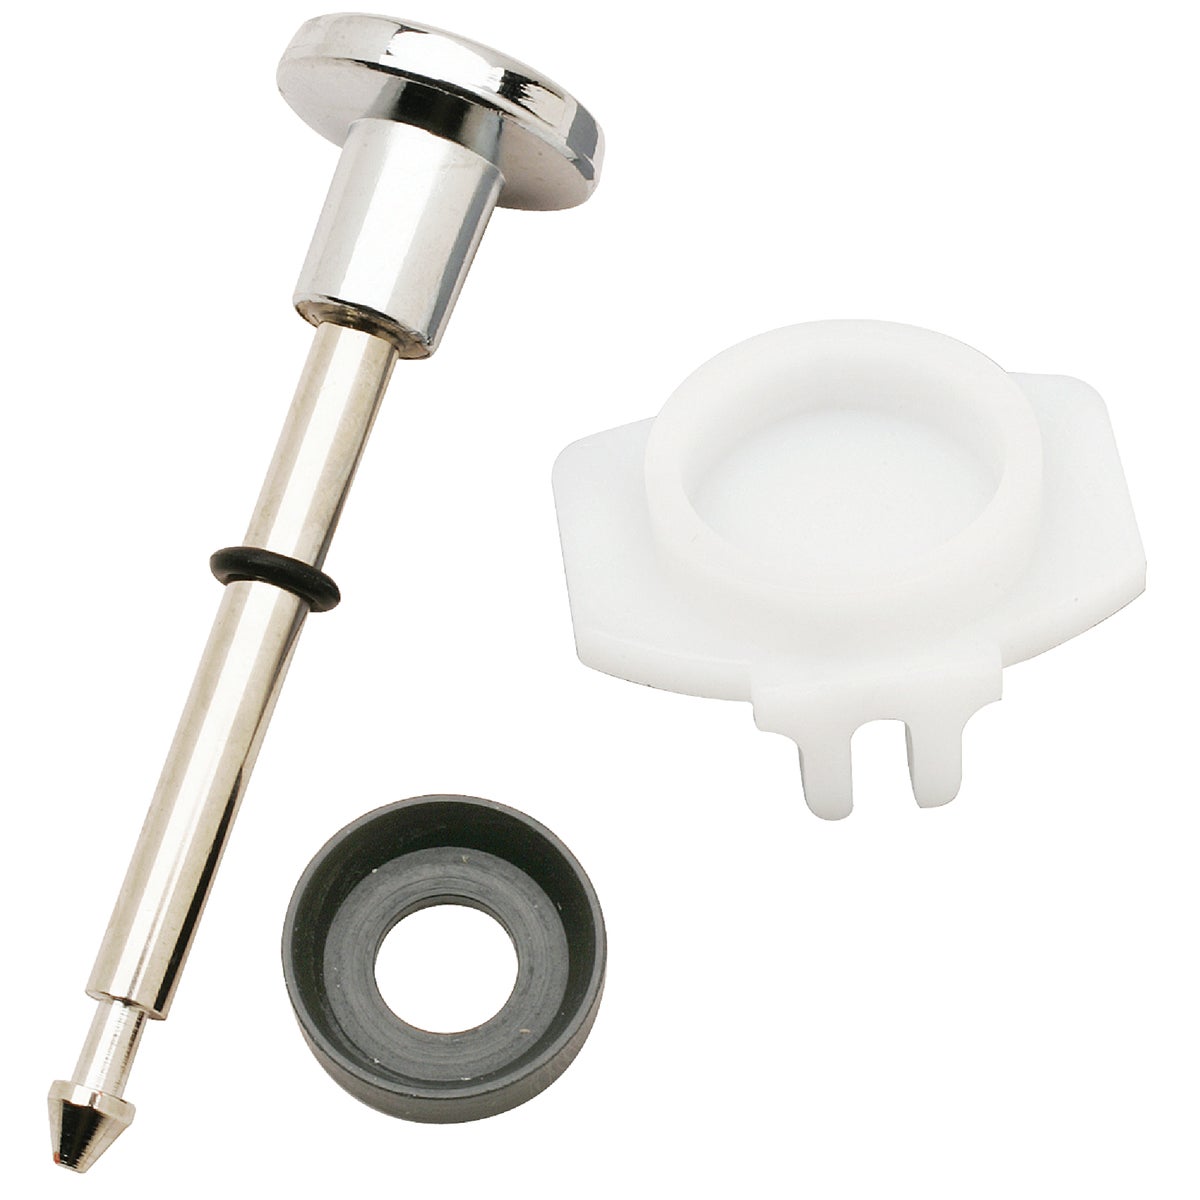 Item 439859, Replacement gate with lift knob for diverter tub spouts.